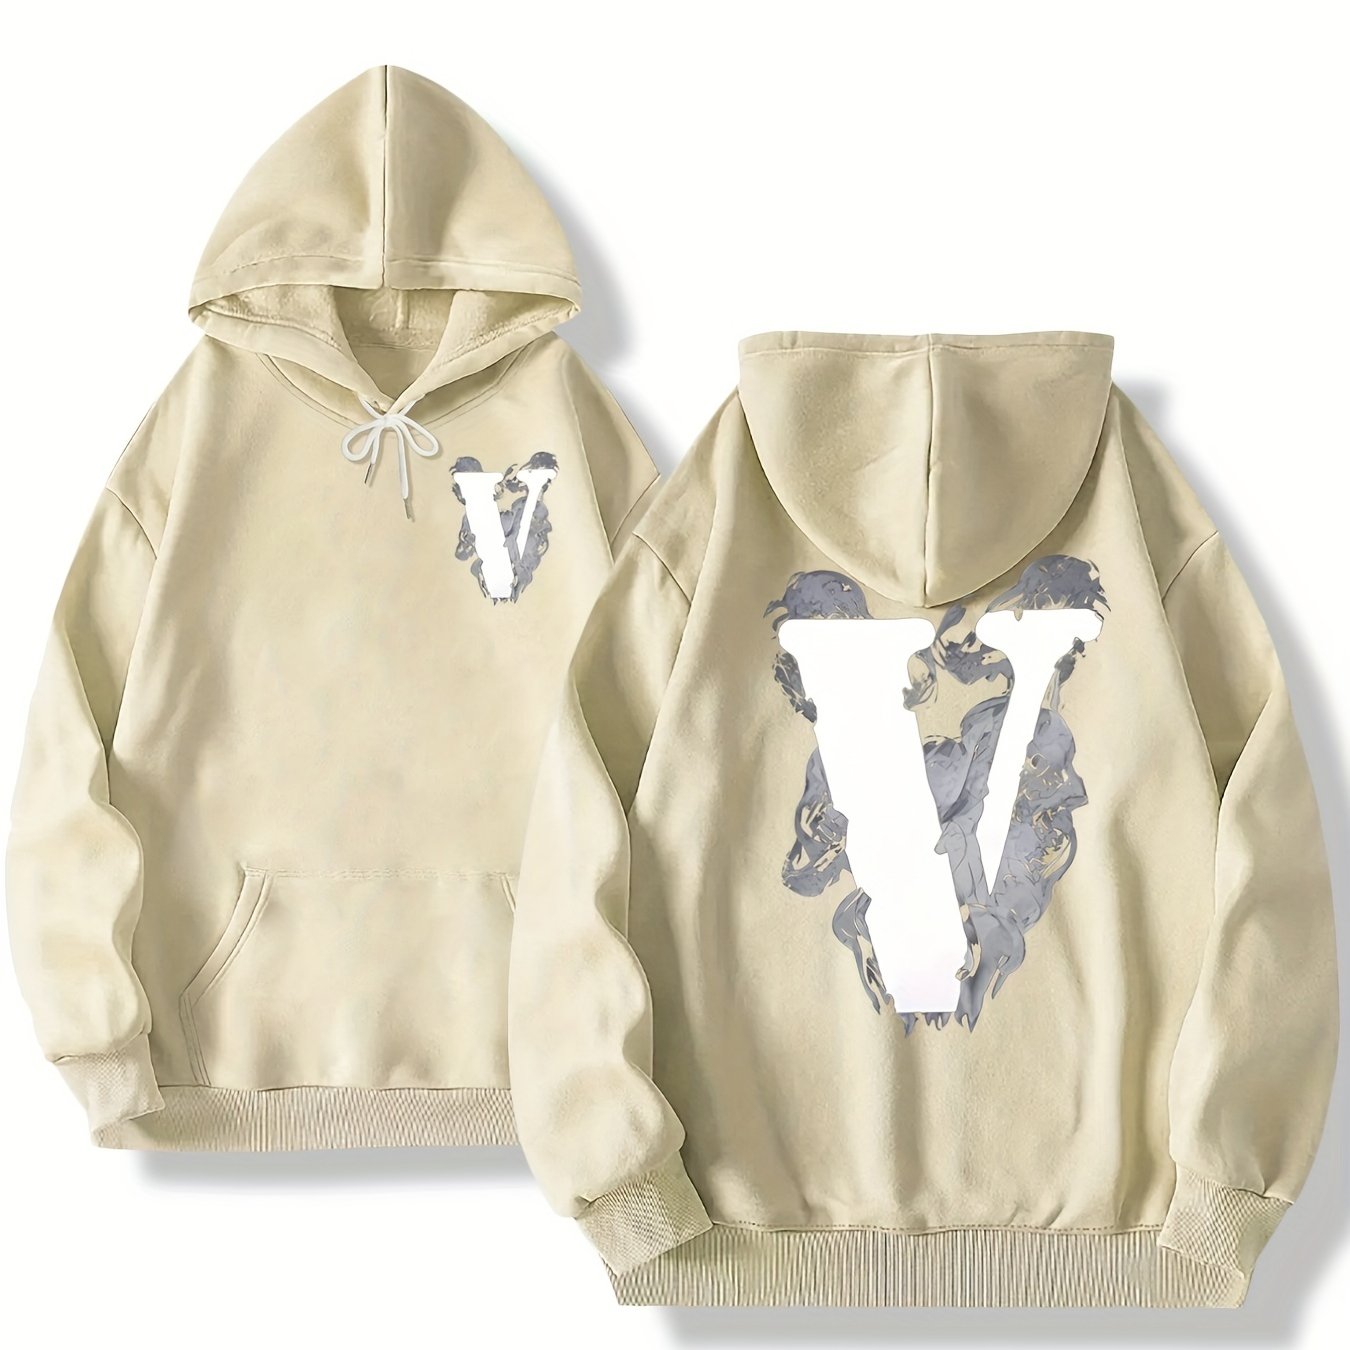 Big Letter V Print, Men's Outfits, Casual Hoodies Long Sleeve